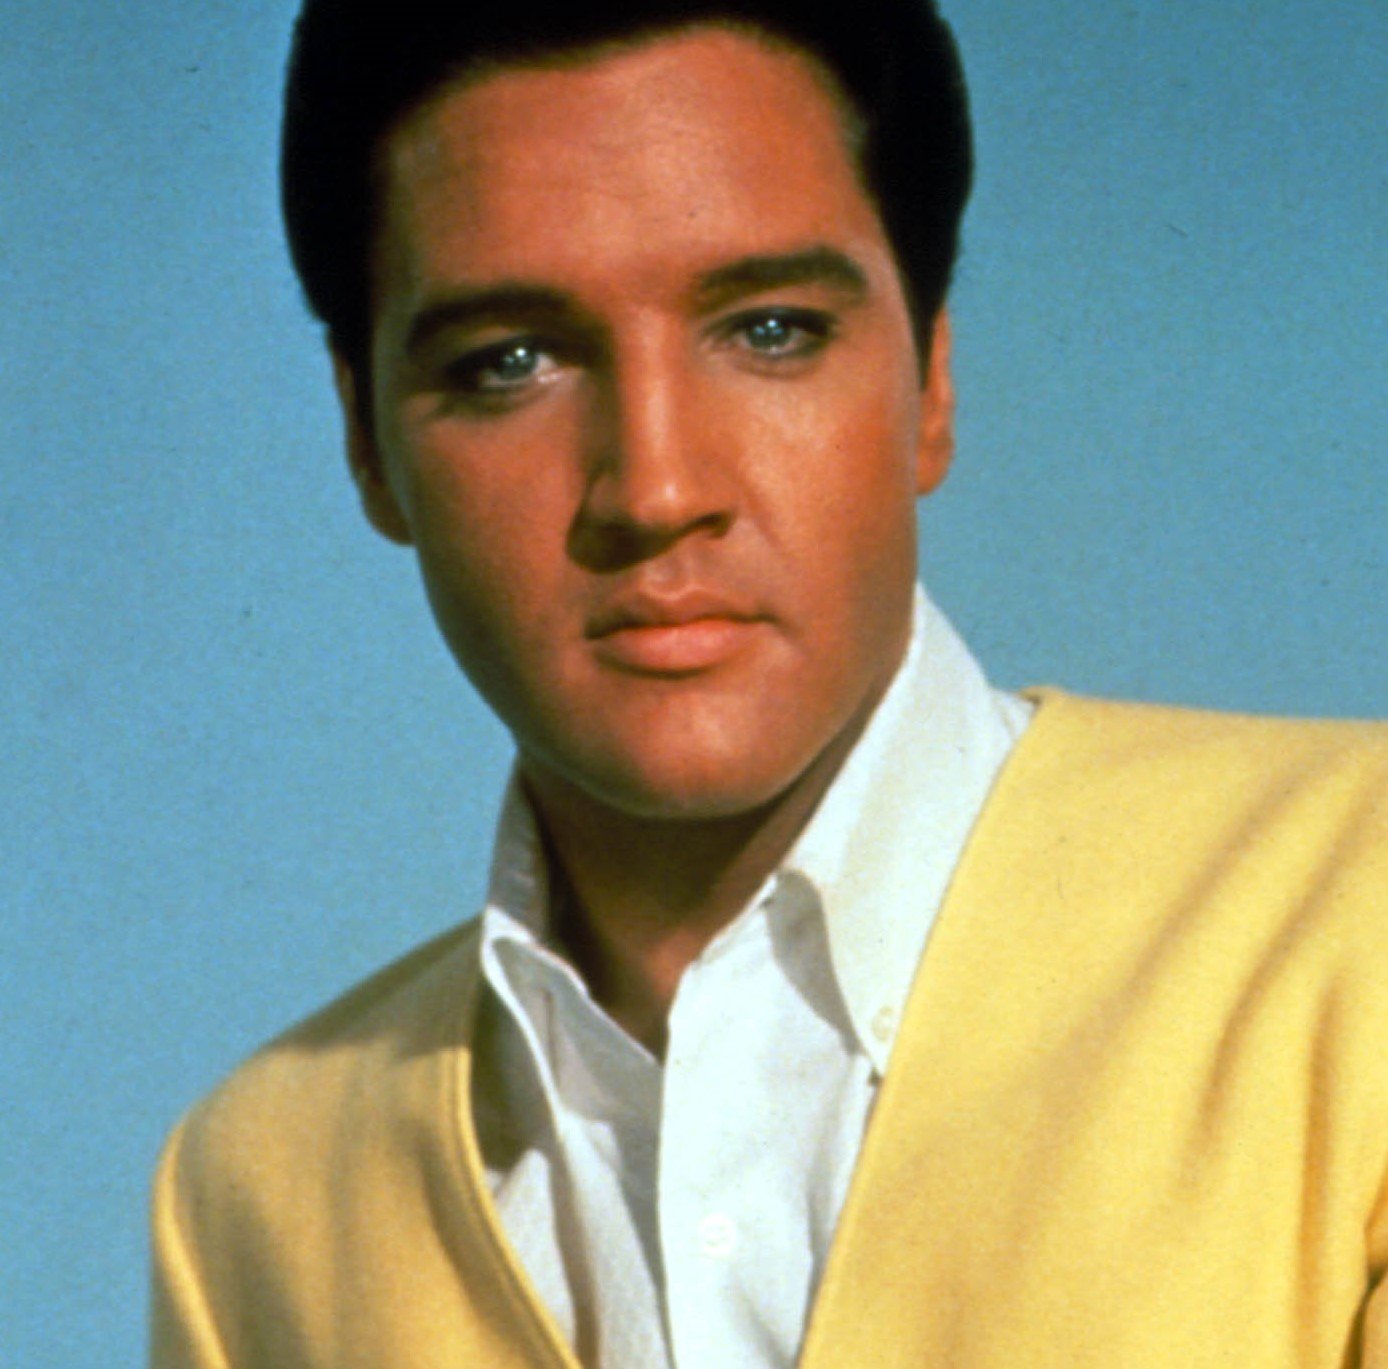 "Don't Cry Daddy" singer Elvis Presley wearing yellow